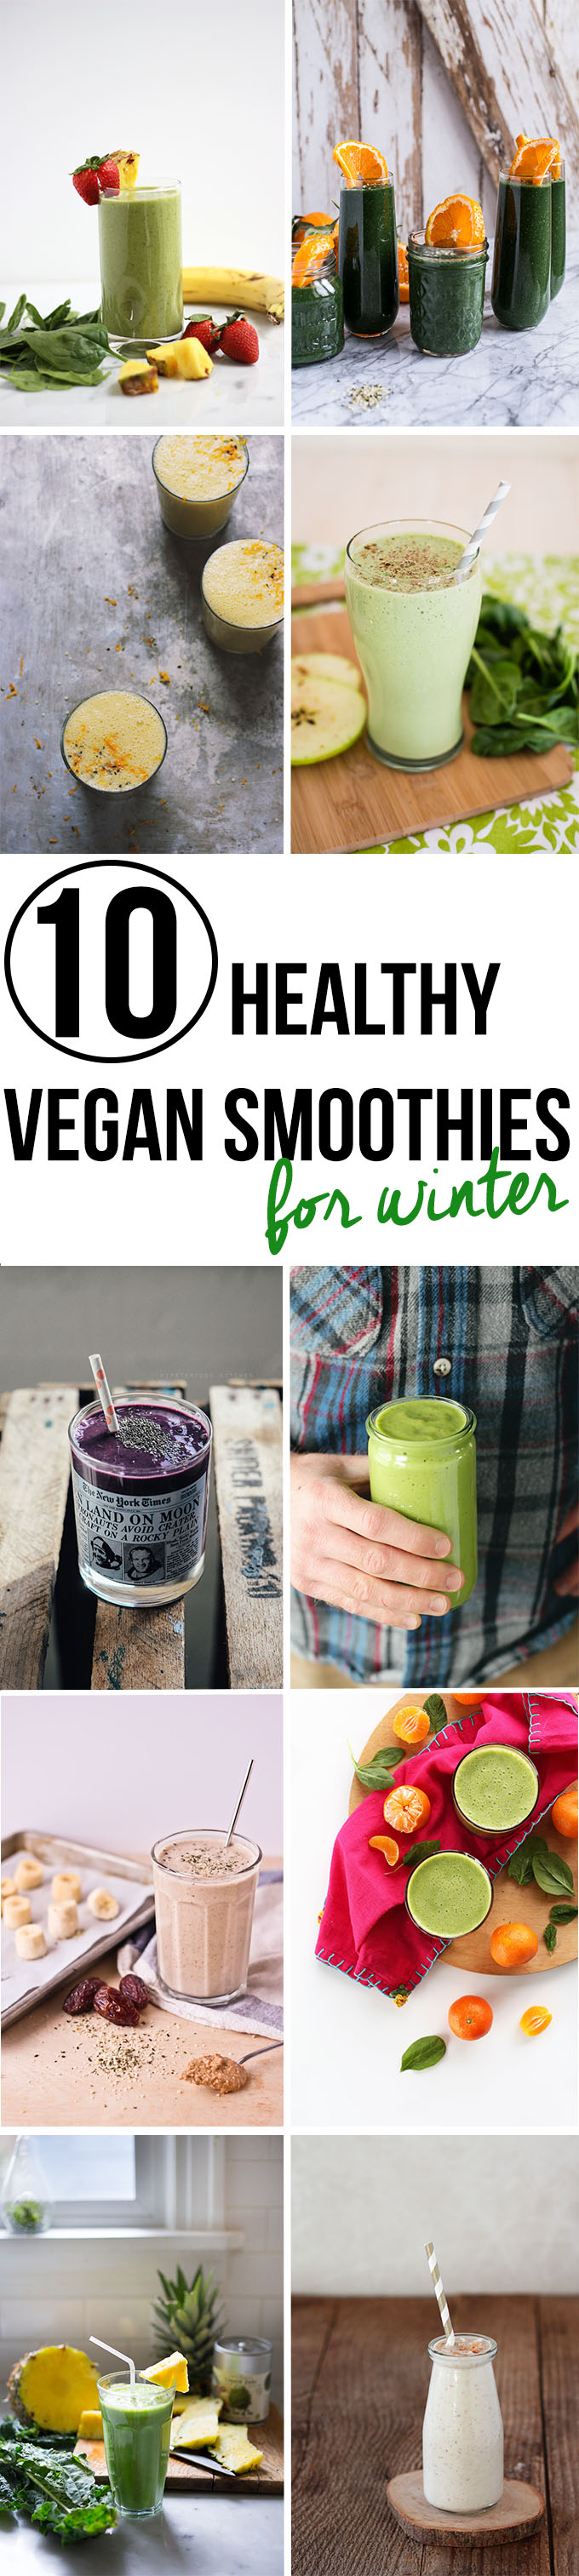 #Healthy #Vegan Smoothies Perfect for Winter